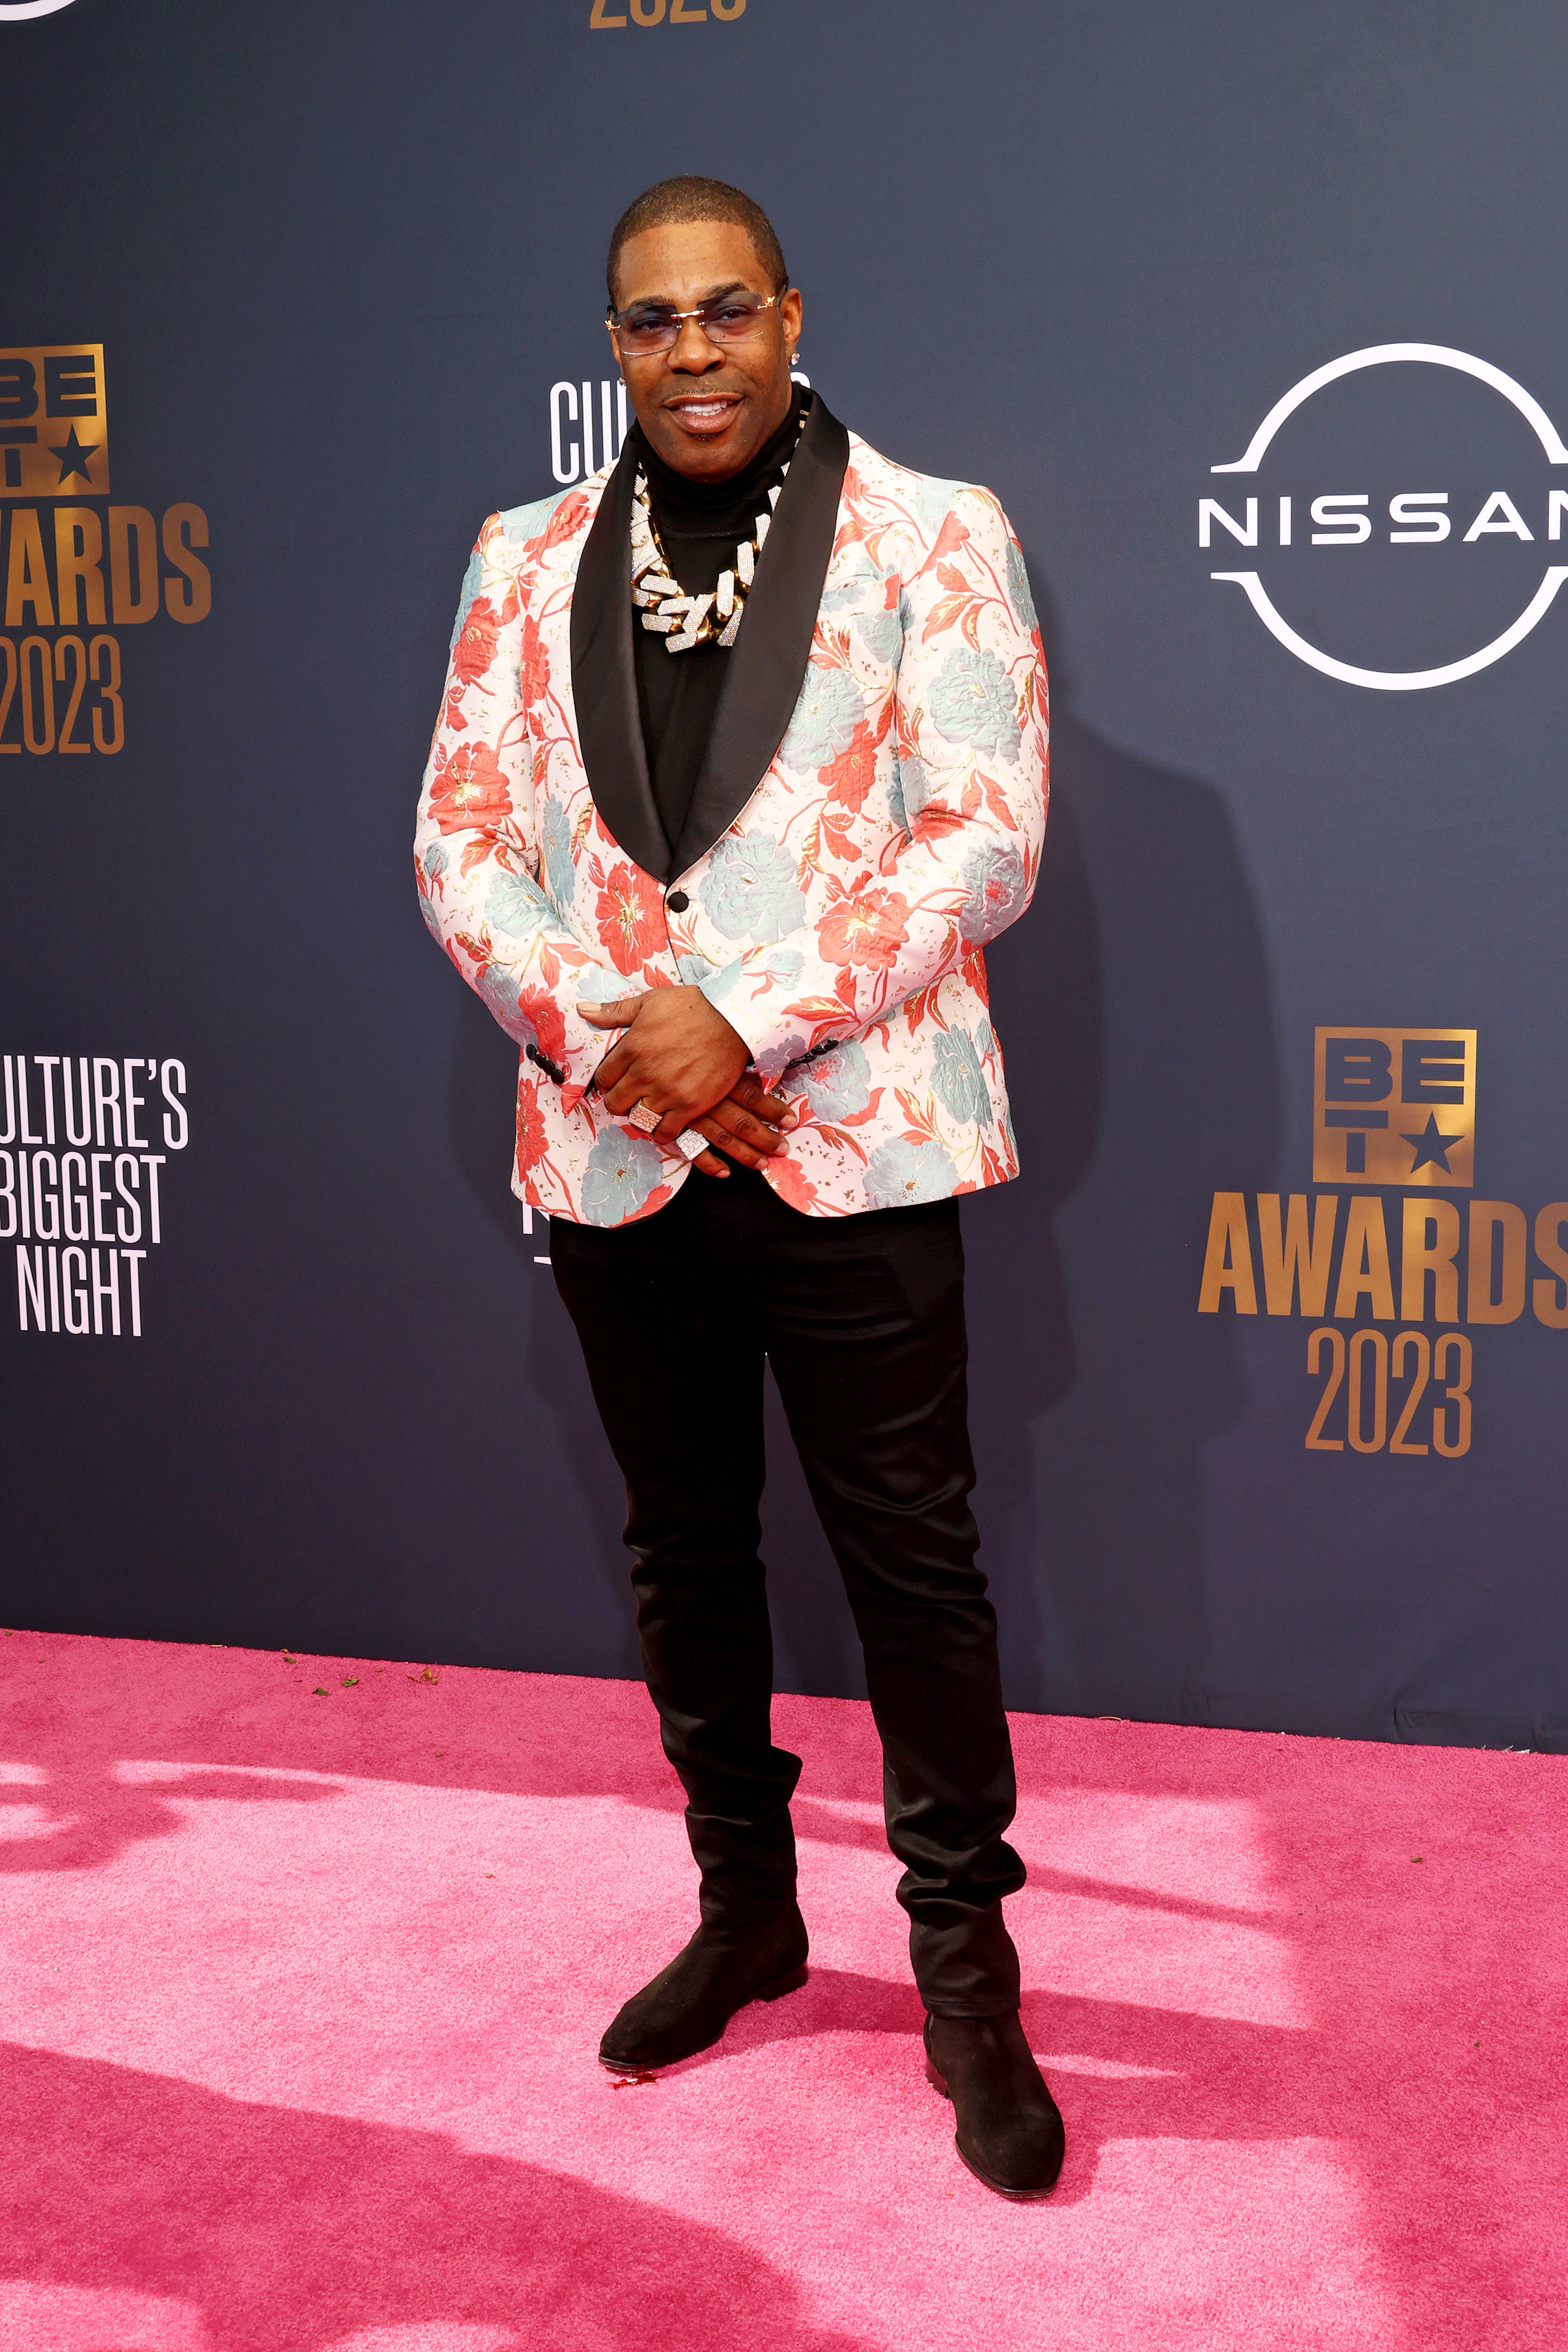 Busta on the red carpet